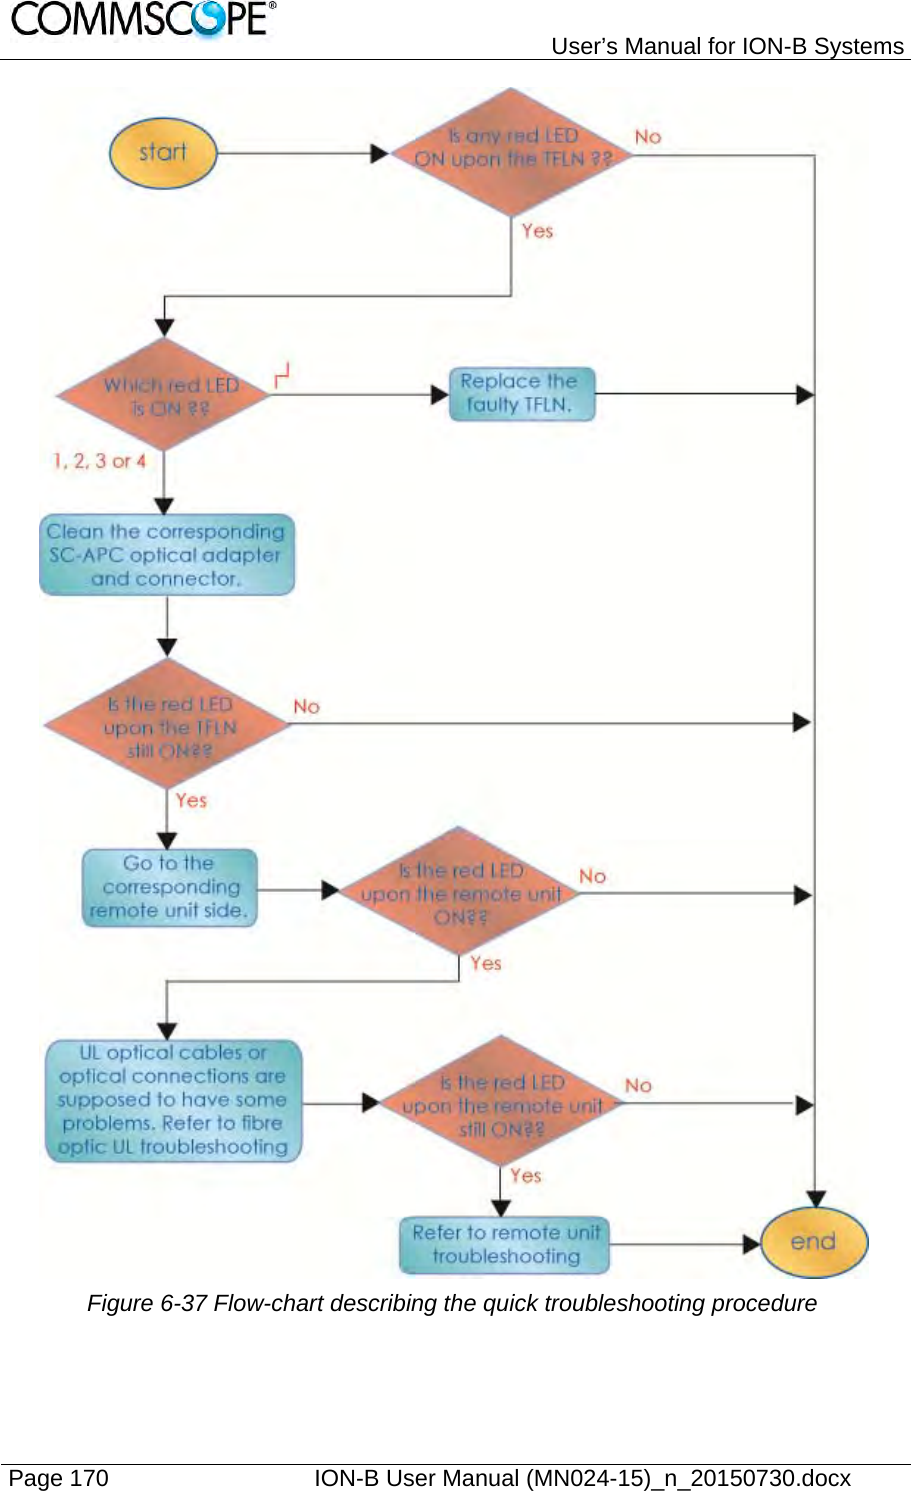   User’s Manual for ION-B Systems Page 170    ION-B User Manual (MN024-15)_n_20150730.docx   Figure 6-37 Flow-chart describing the quick troubleshooting procedure  